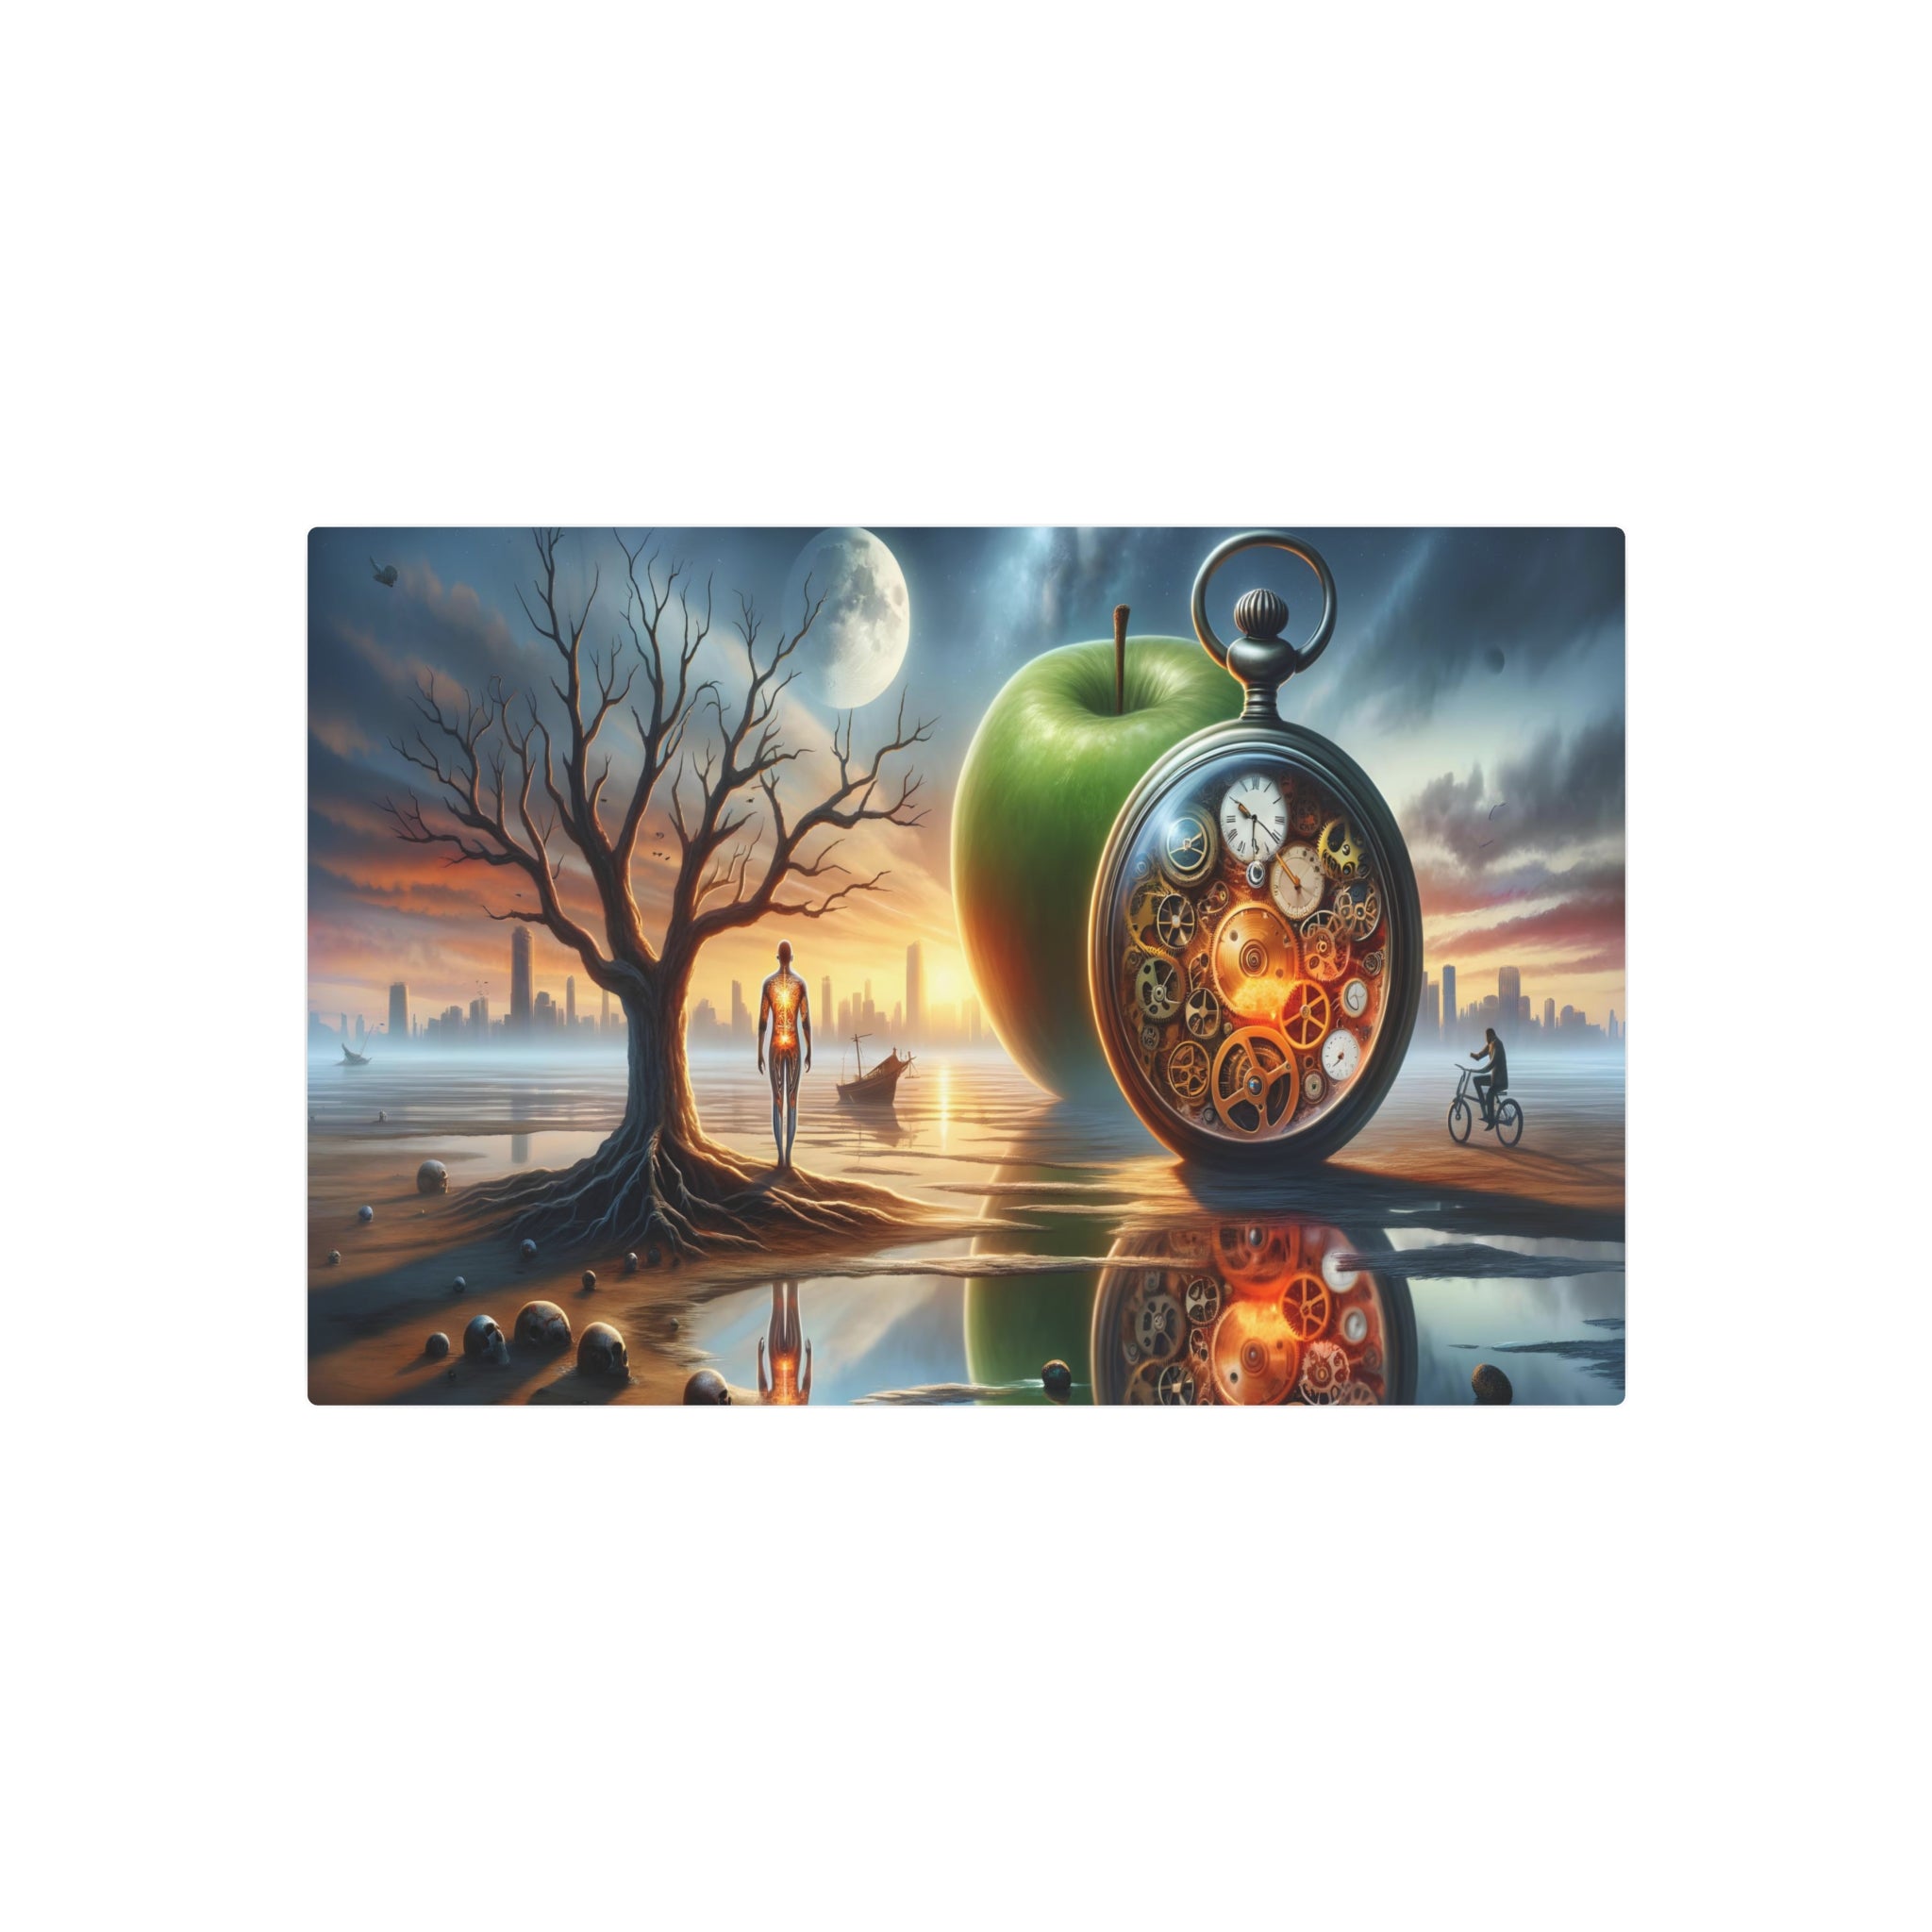 Metal Poster Art | "Modern Surrealism Art: Melting Pocket Watches, Gear-Labyrinth Human Figure & Glowing Apple Moon in Sunset Landscape - Contemporary Surreal Style